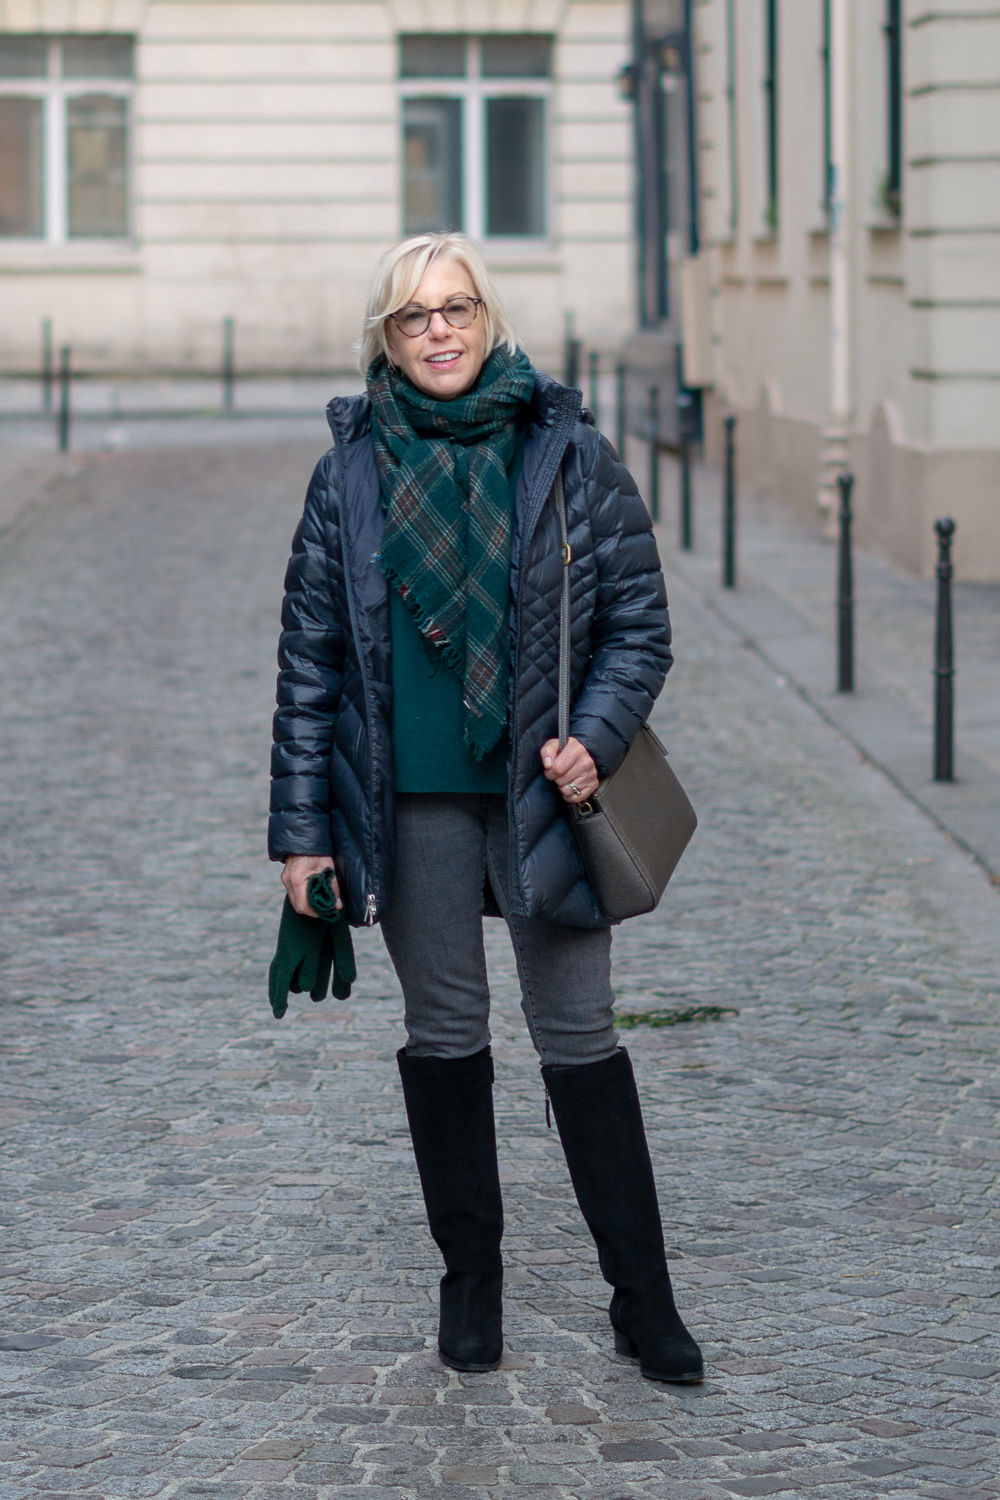 Winter travel outfit: Susan B. wears a navy puffer jacket, forest green top and scarf, grey jeans and black knee boots. Details at une femme d'un certain age.